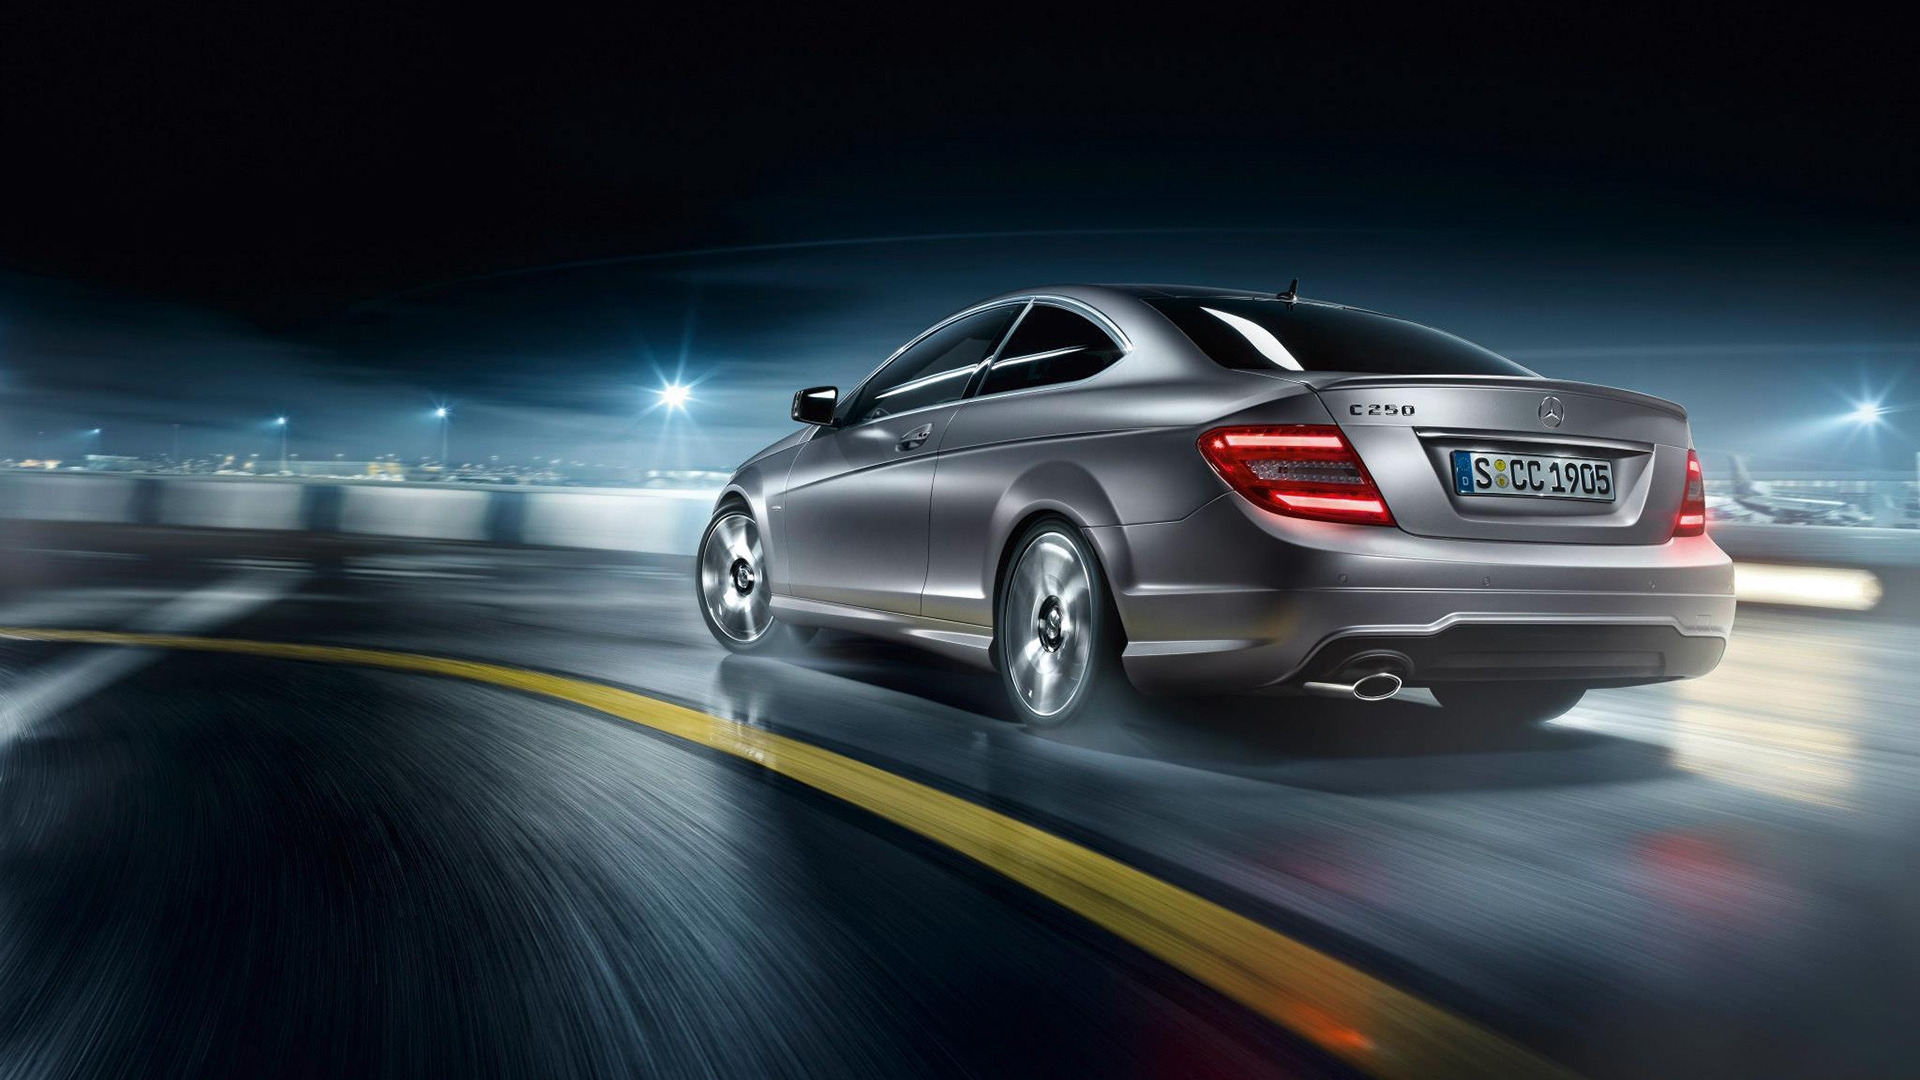 Rear of Mercedes C Class AMG 2013 for 1920 x 1080 HDTV 1080p resolution